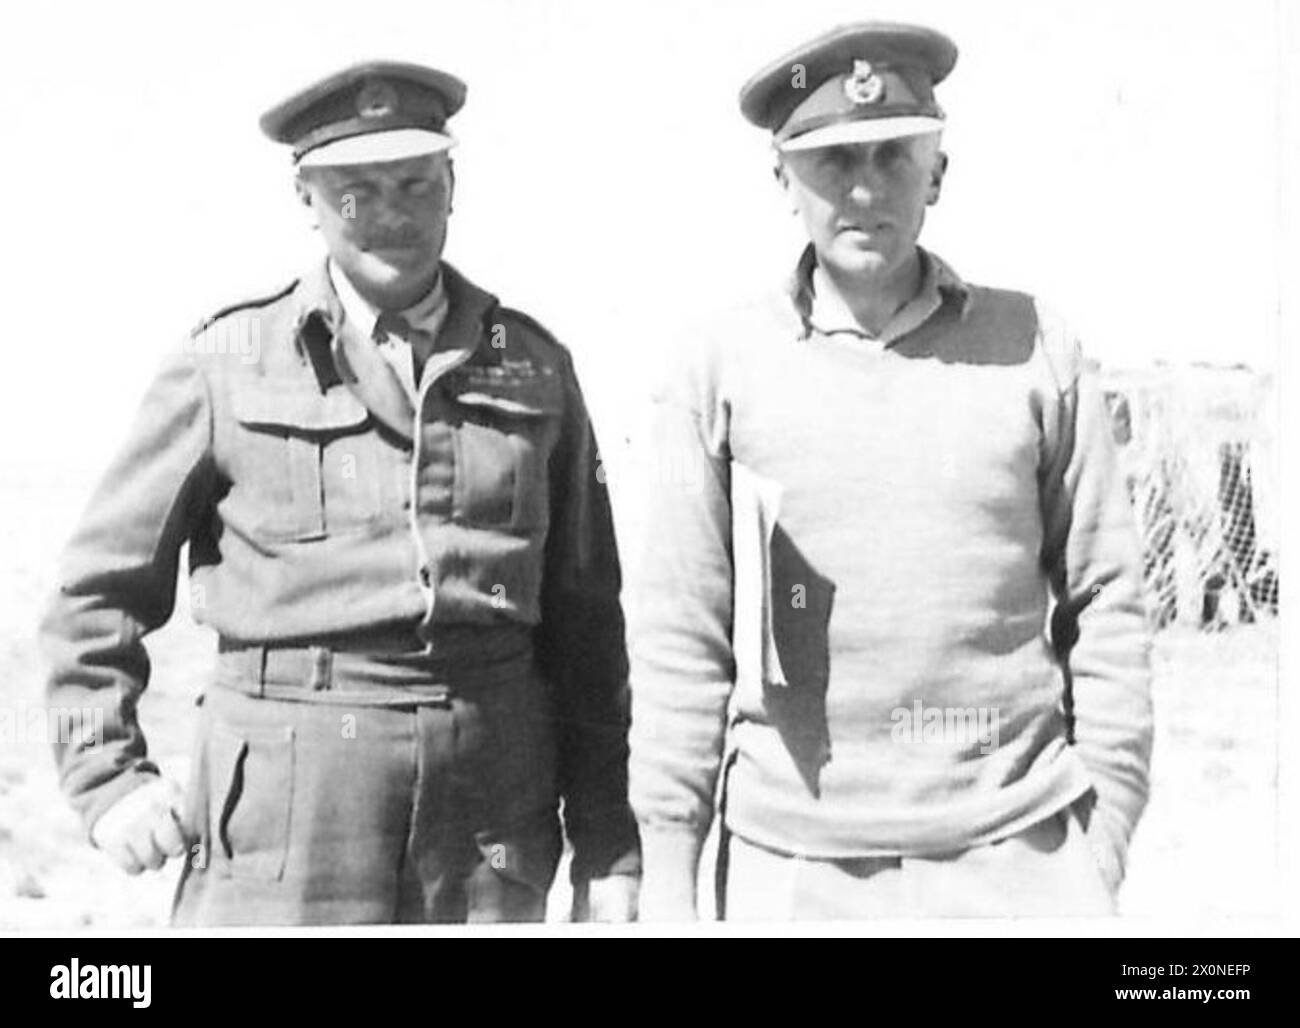 BATTLE OF THE GABES GAP - The Commanders of the now famous 'Left Hook' which defeated Rommel at Mareth, Lt. Gen. Freyburg and Lt. Gen. Horrocks (GOC 10th Corps). Photographic negative , British Army Stock Photo